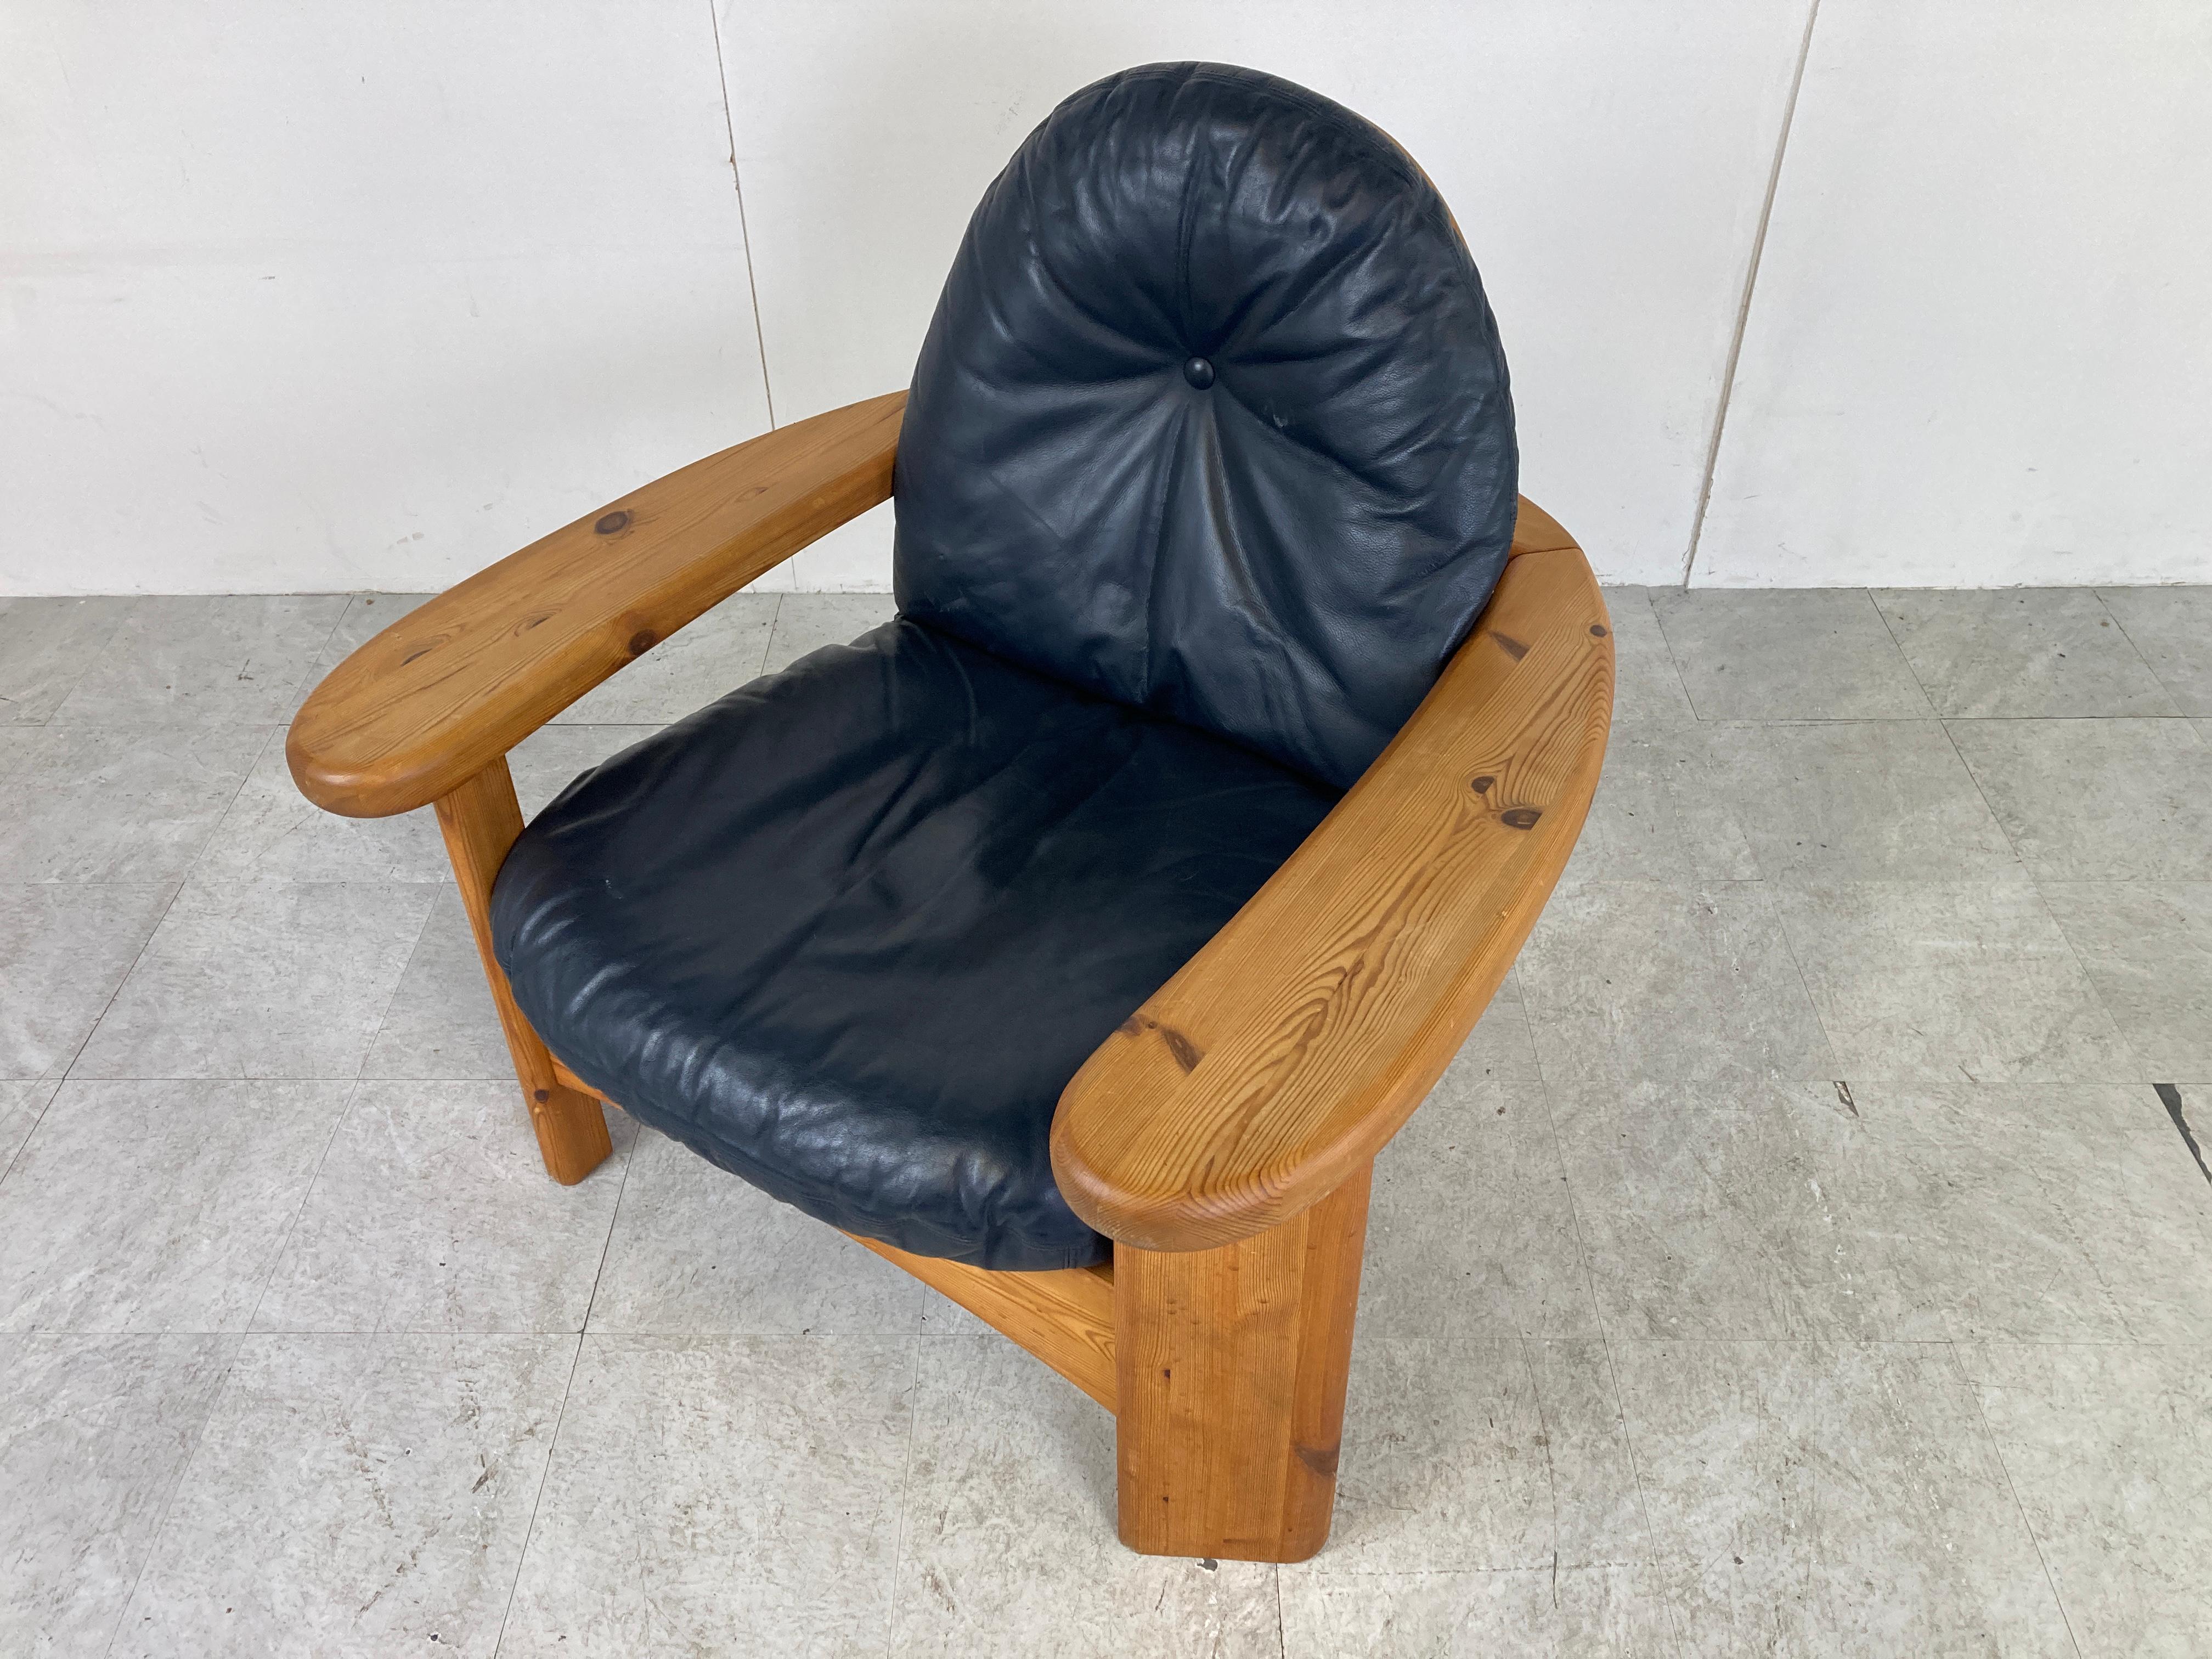 Oversize brutalist pine wood armchair with black leather cushions.

very comfortable armchair wkith a nice 'brut' look.

Its tripod base and interlocking design really sets it apart and looks great.

1960s - Germany

Dimensions
Height: